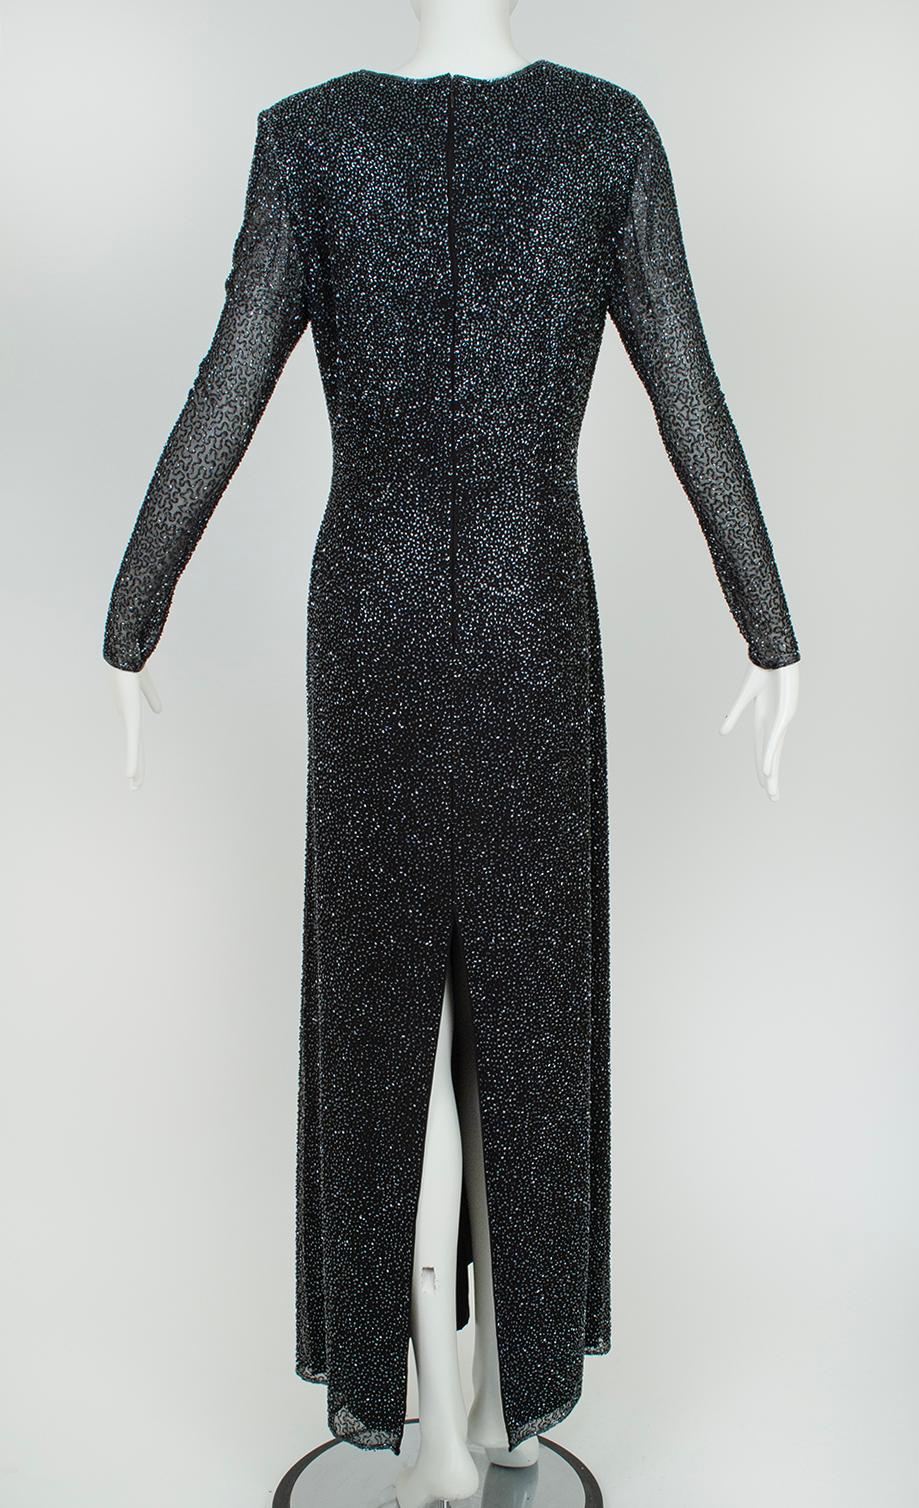 Lillie Rubin Black Full Length Beaded Column Gown w Illusion Sleeves – L, 21st C In Excellent Condition For Sale In Tucson, AZ